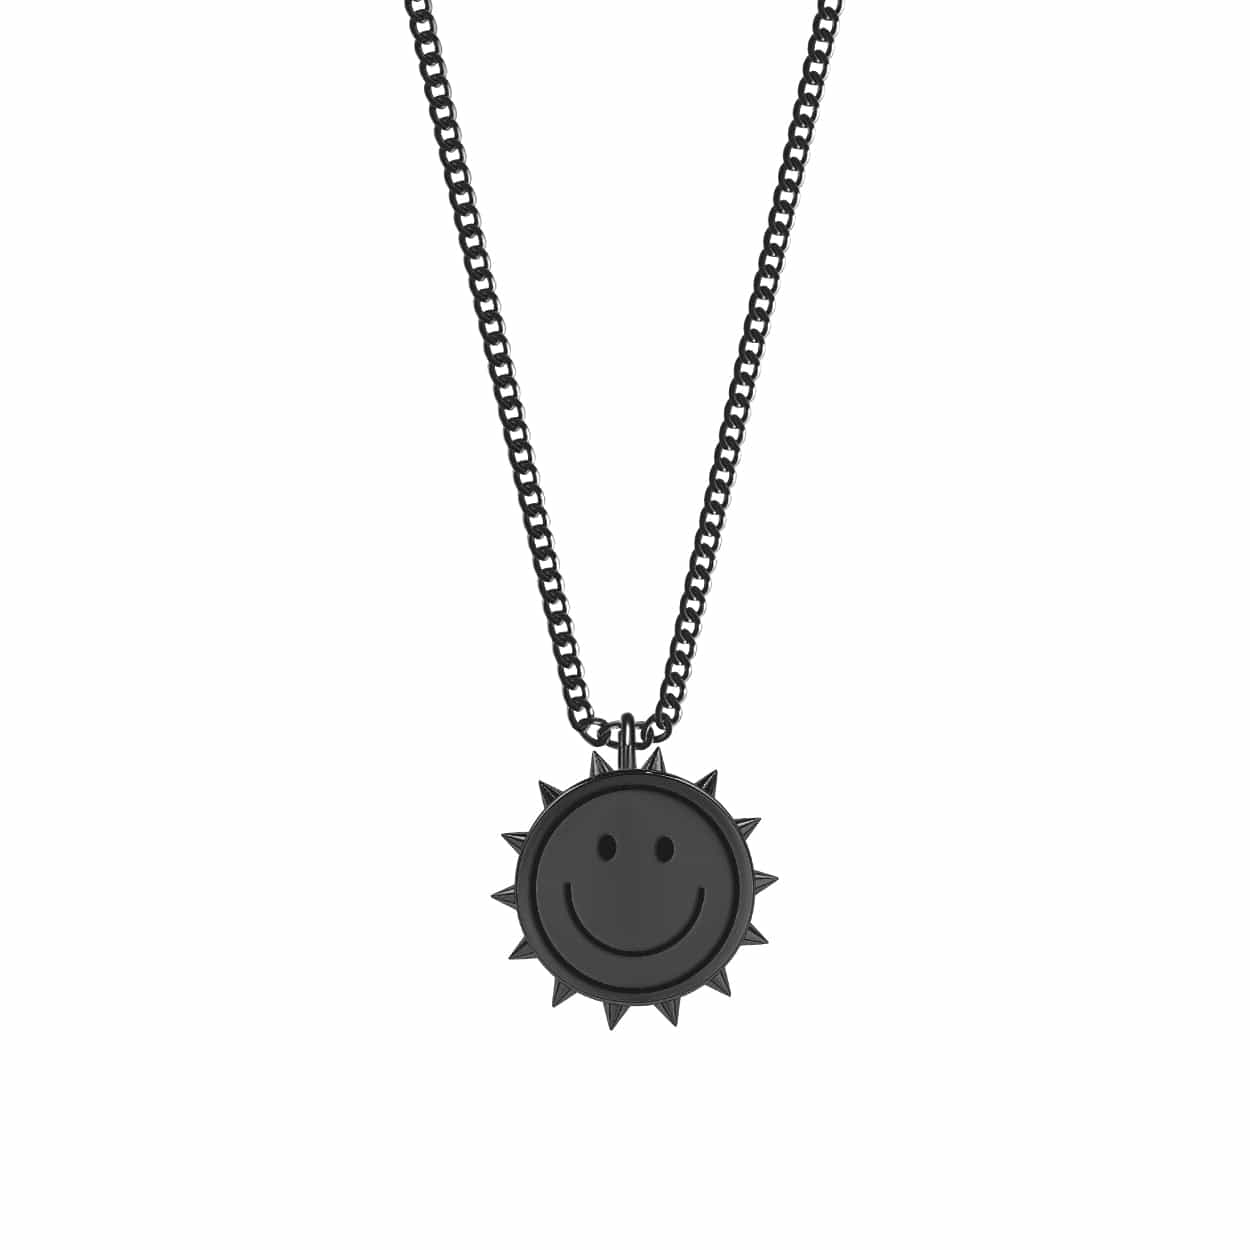 Mister x Cyberdreams A Day to Remember Necklace